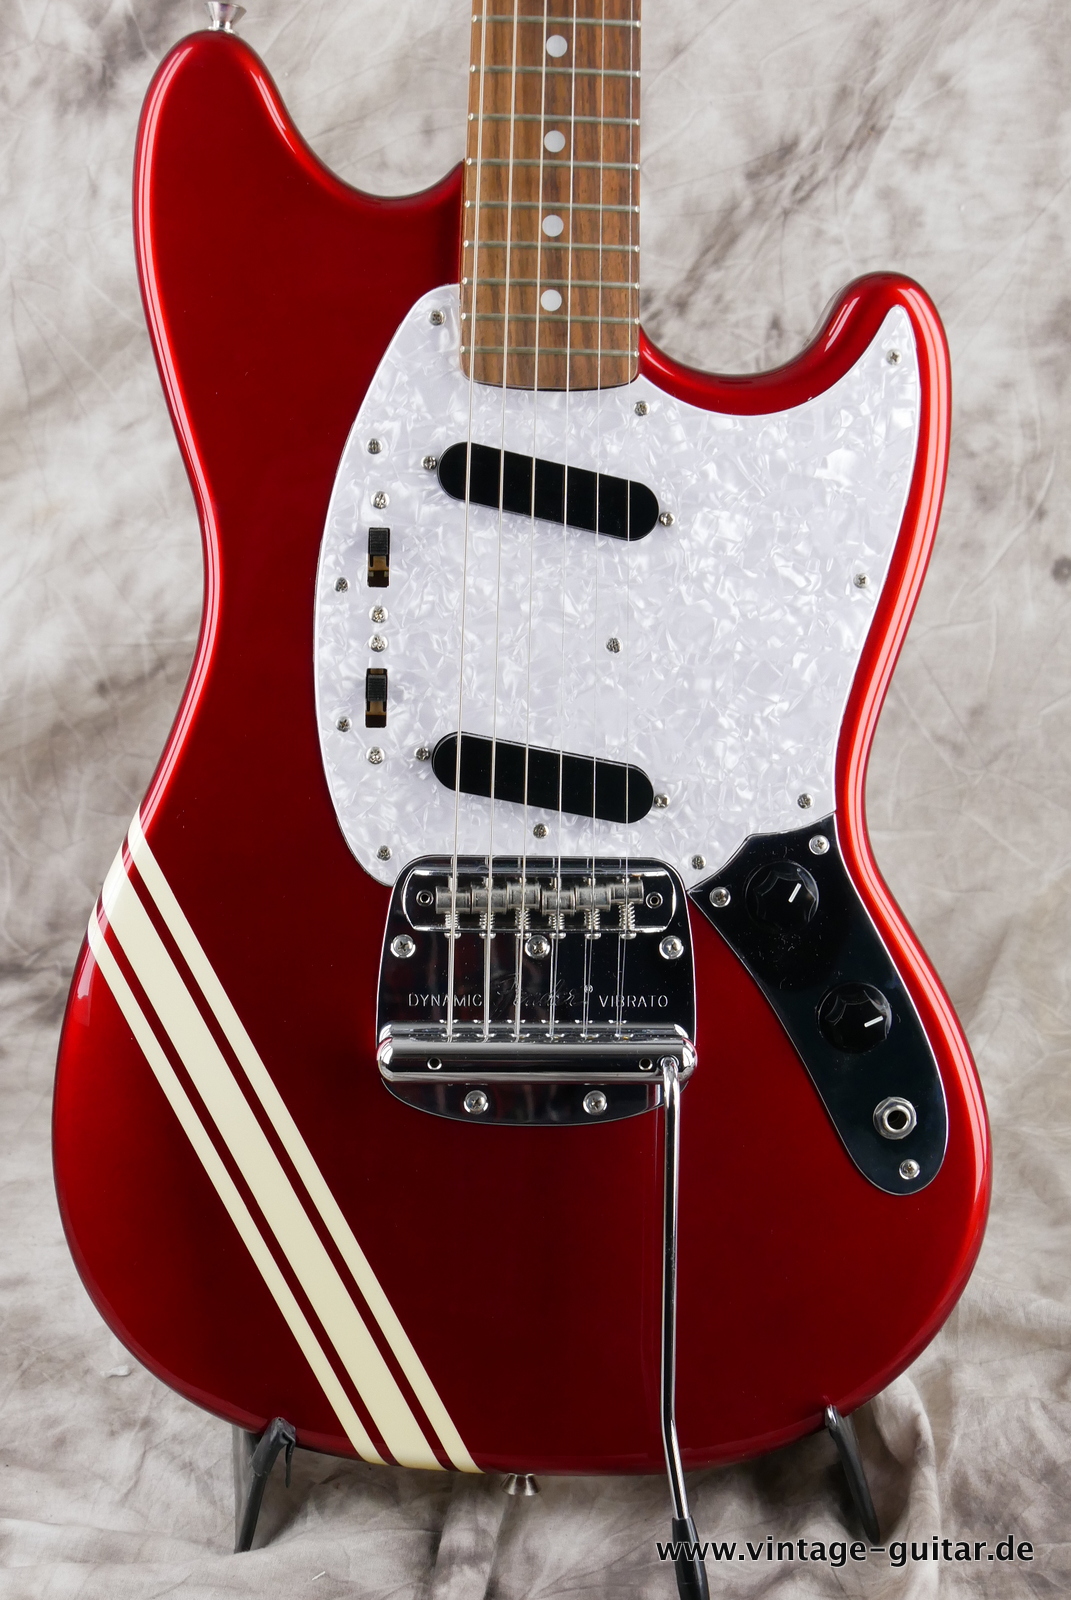 img/vintage/5133/Fender_Mustang_competition_70s_RI_candy_apple_red_Japan_2002-003.JPG